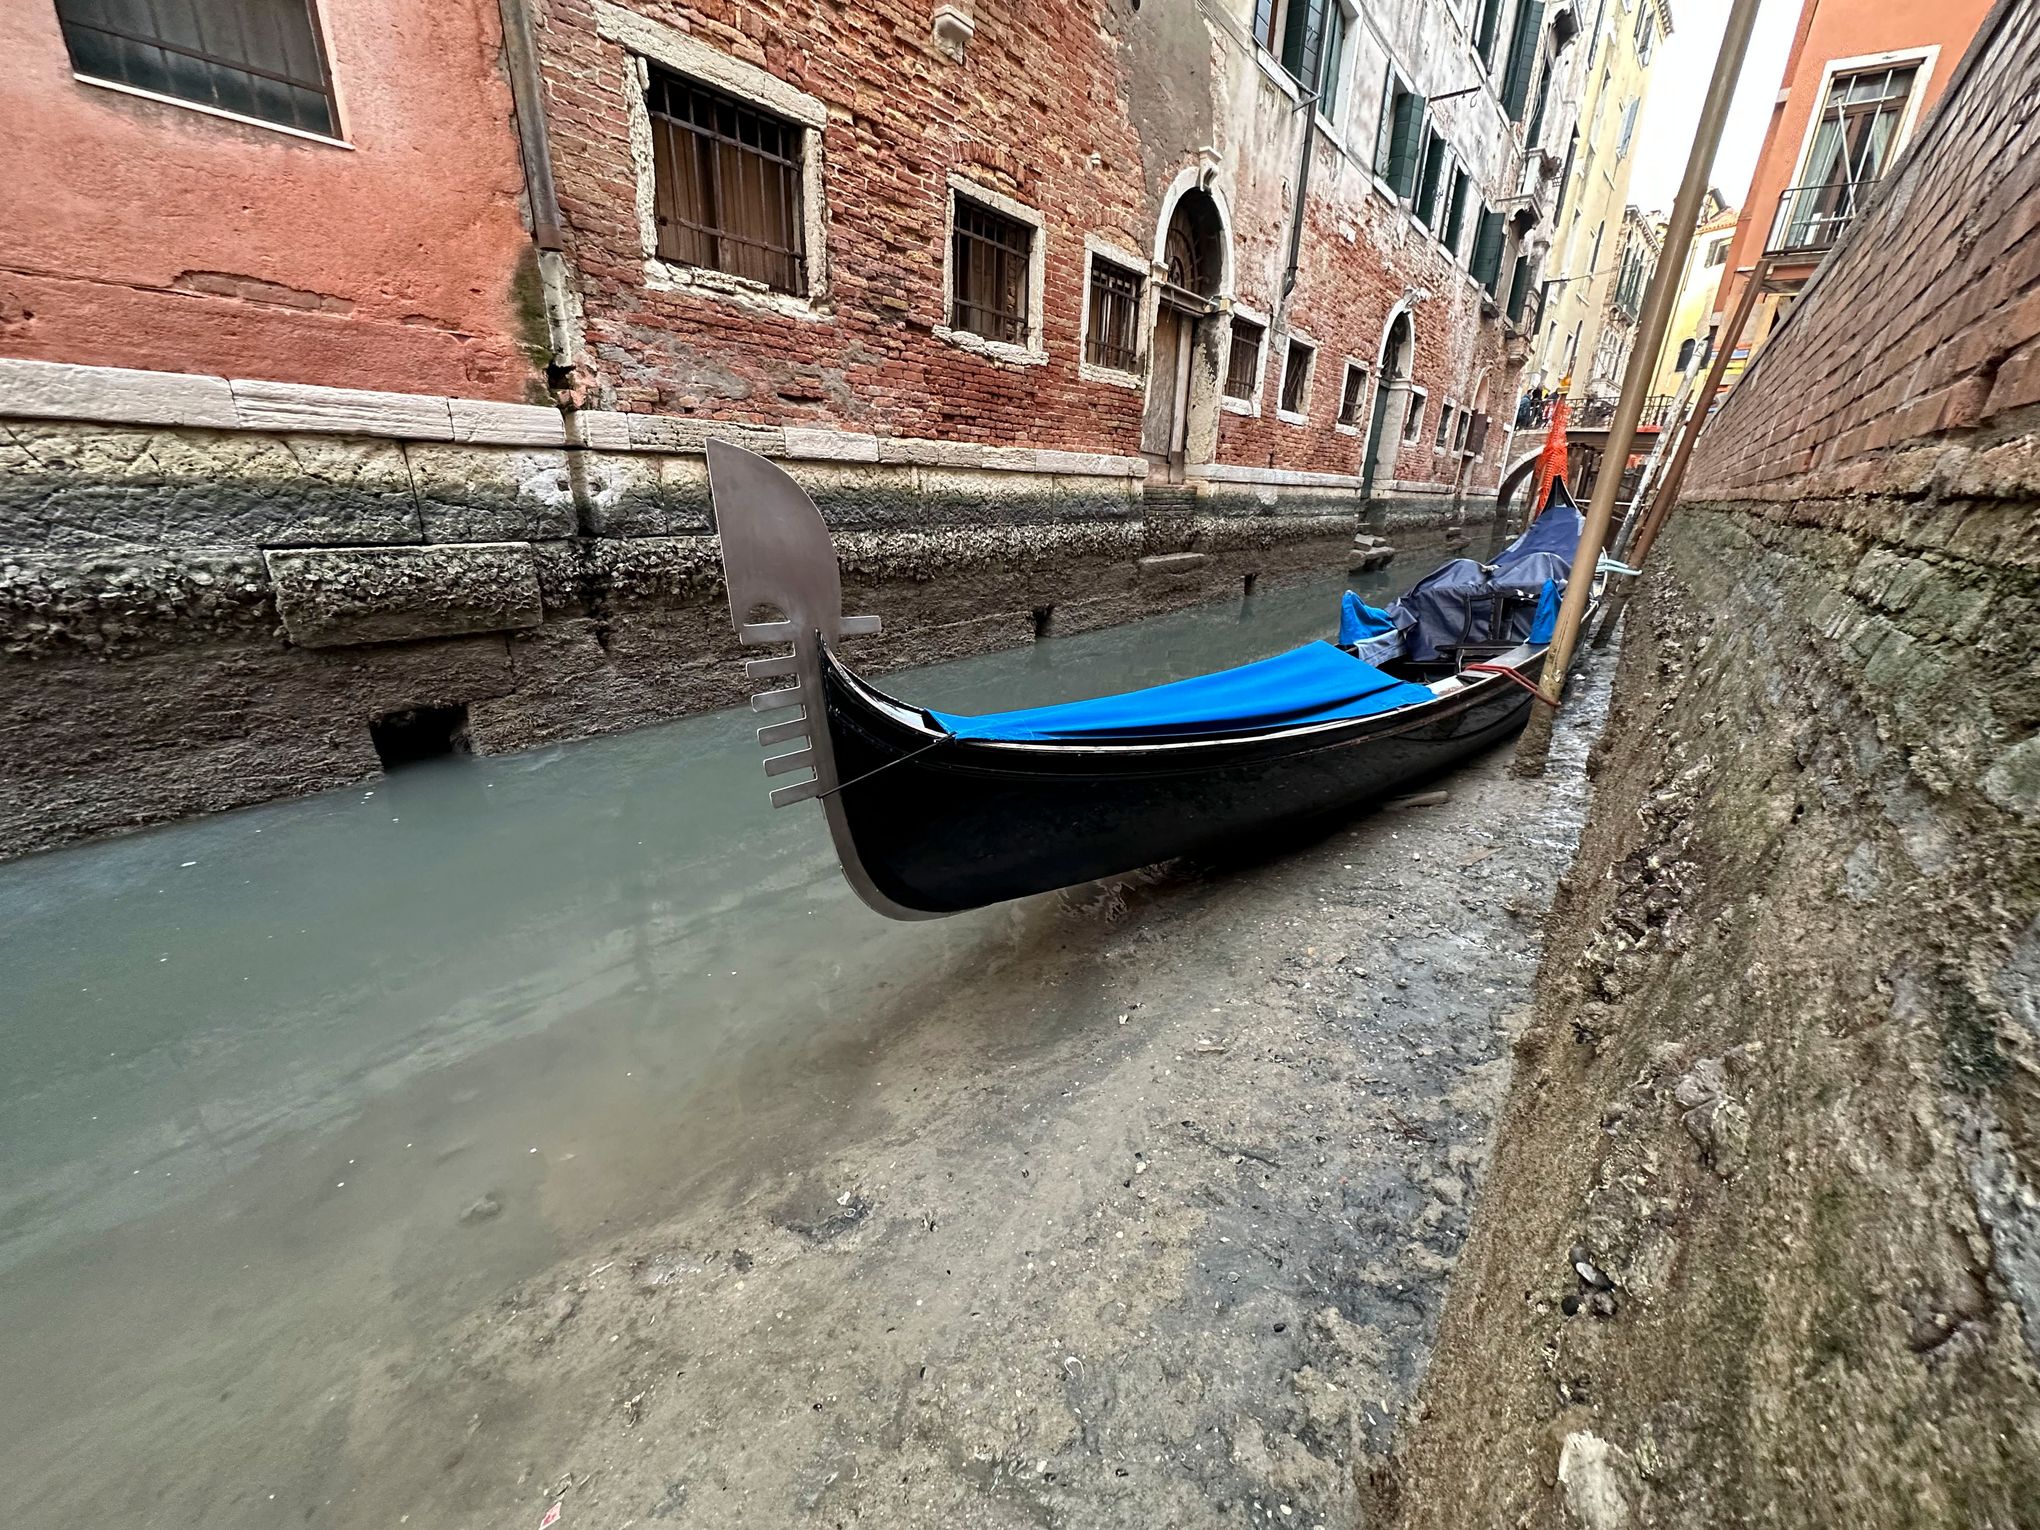 Smaller Canals Dry Up In Venice